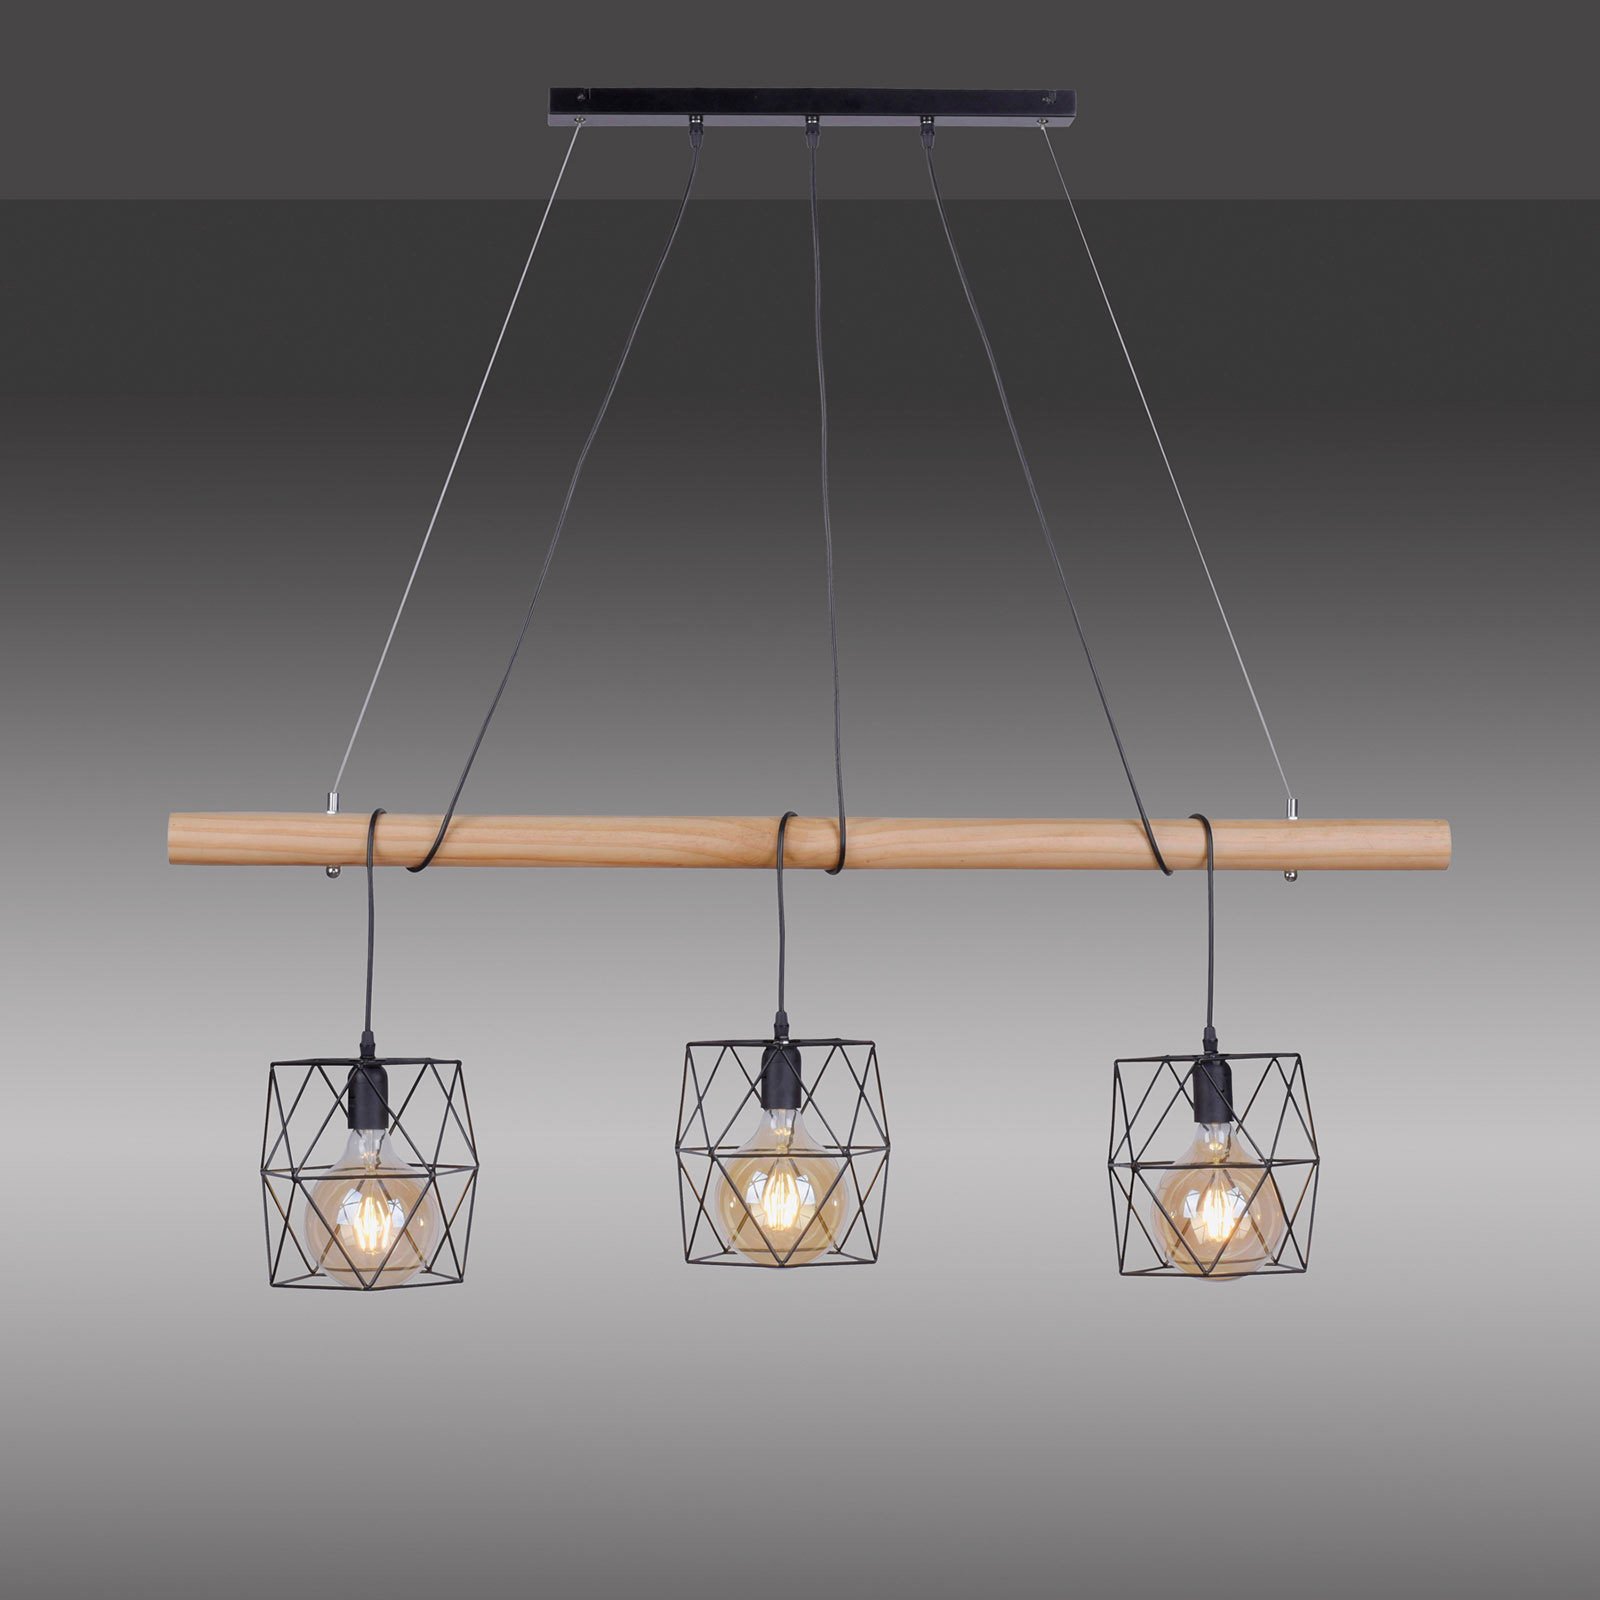 Edgar LED hanging light, cage lampshades, 3-bulb